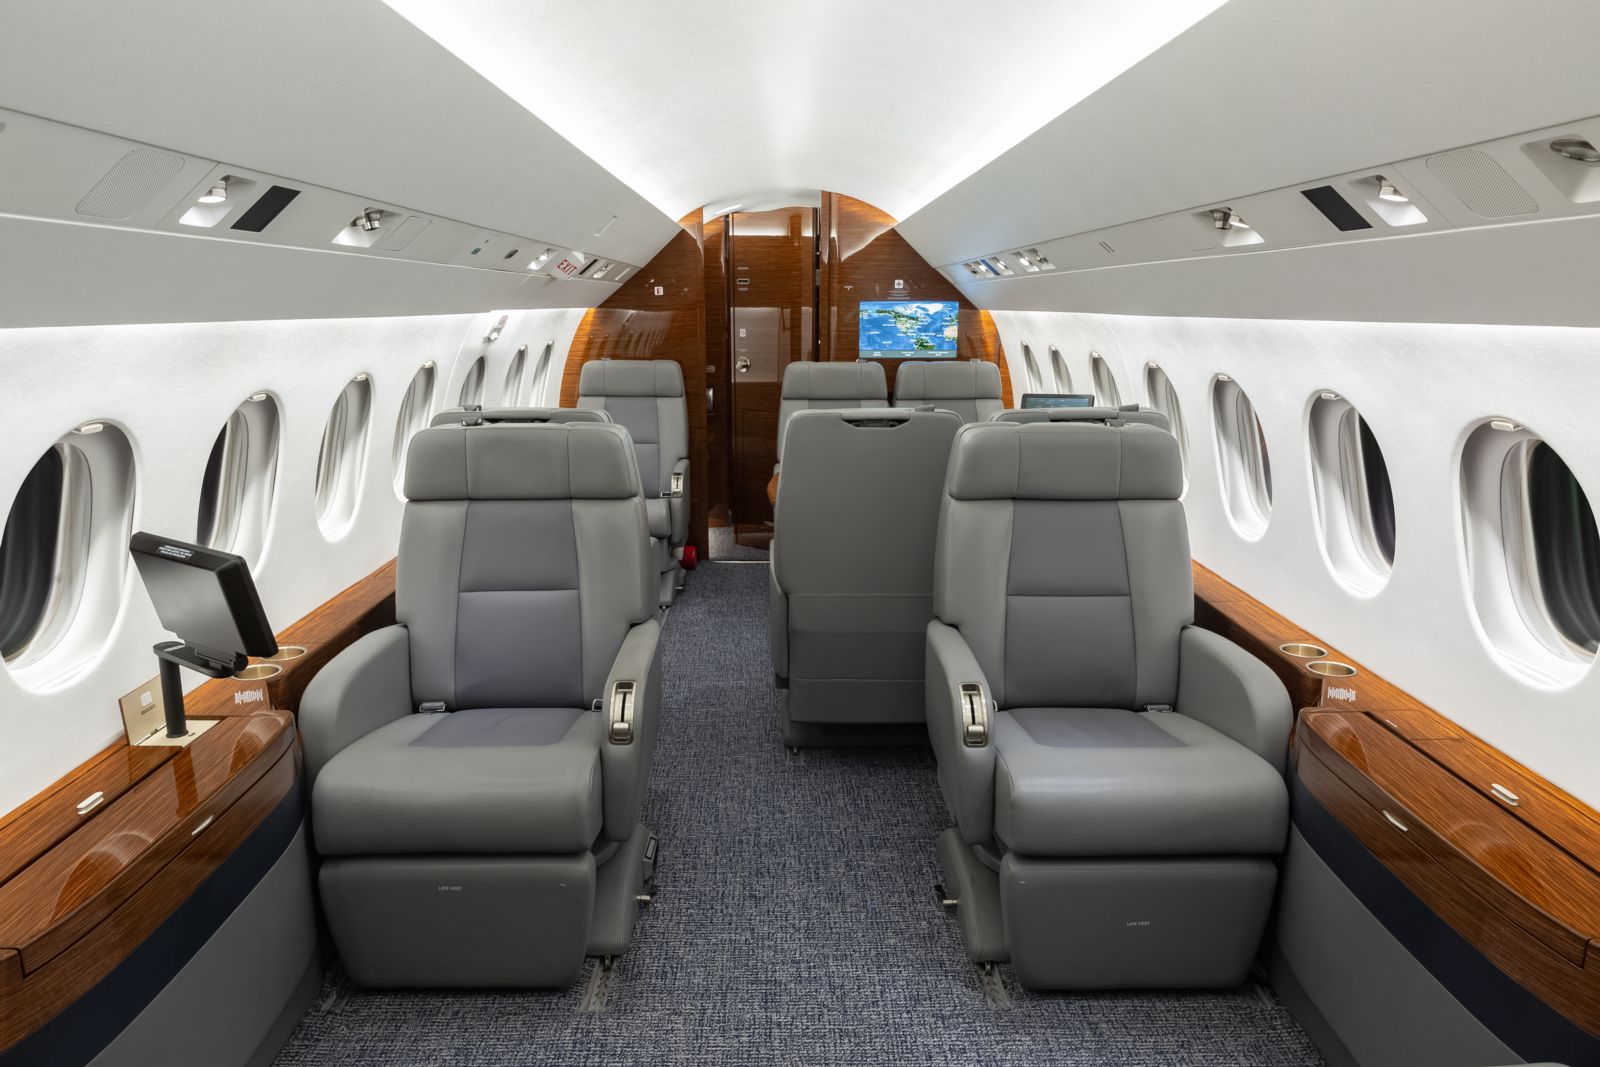 Dassault Falcon 2000LX  S/N 262 for sale | gallery image: /userfiles/files/bfp_5510.jpg